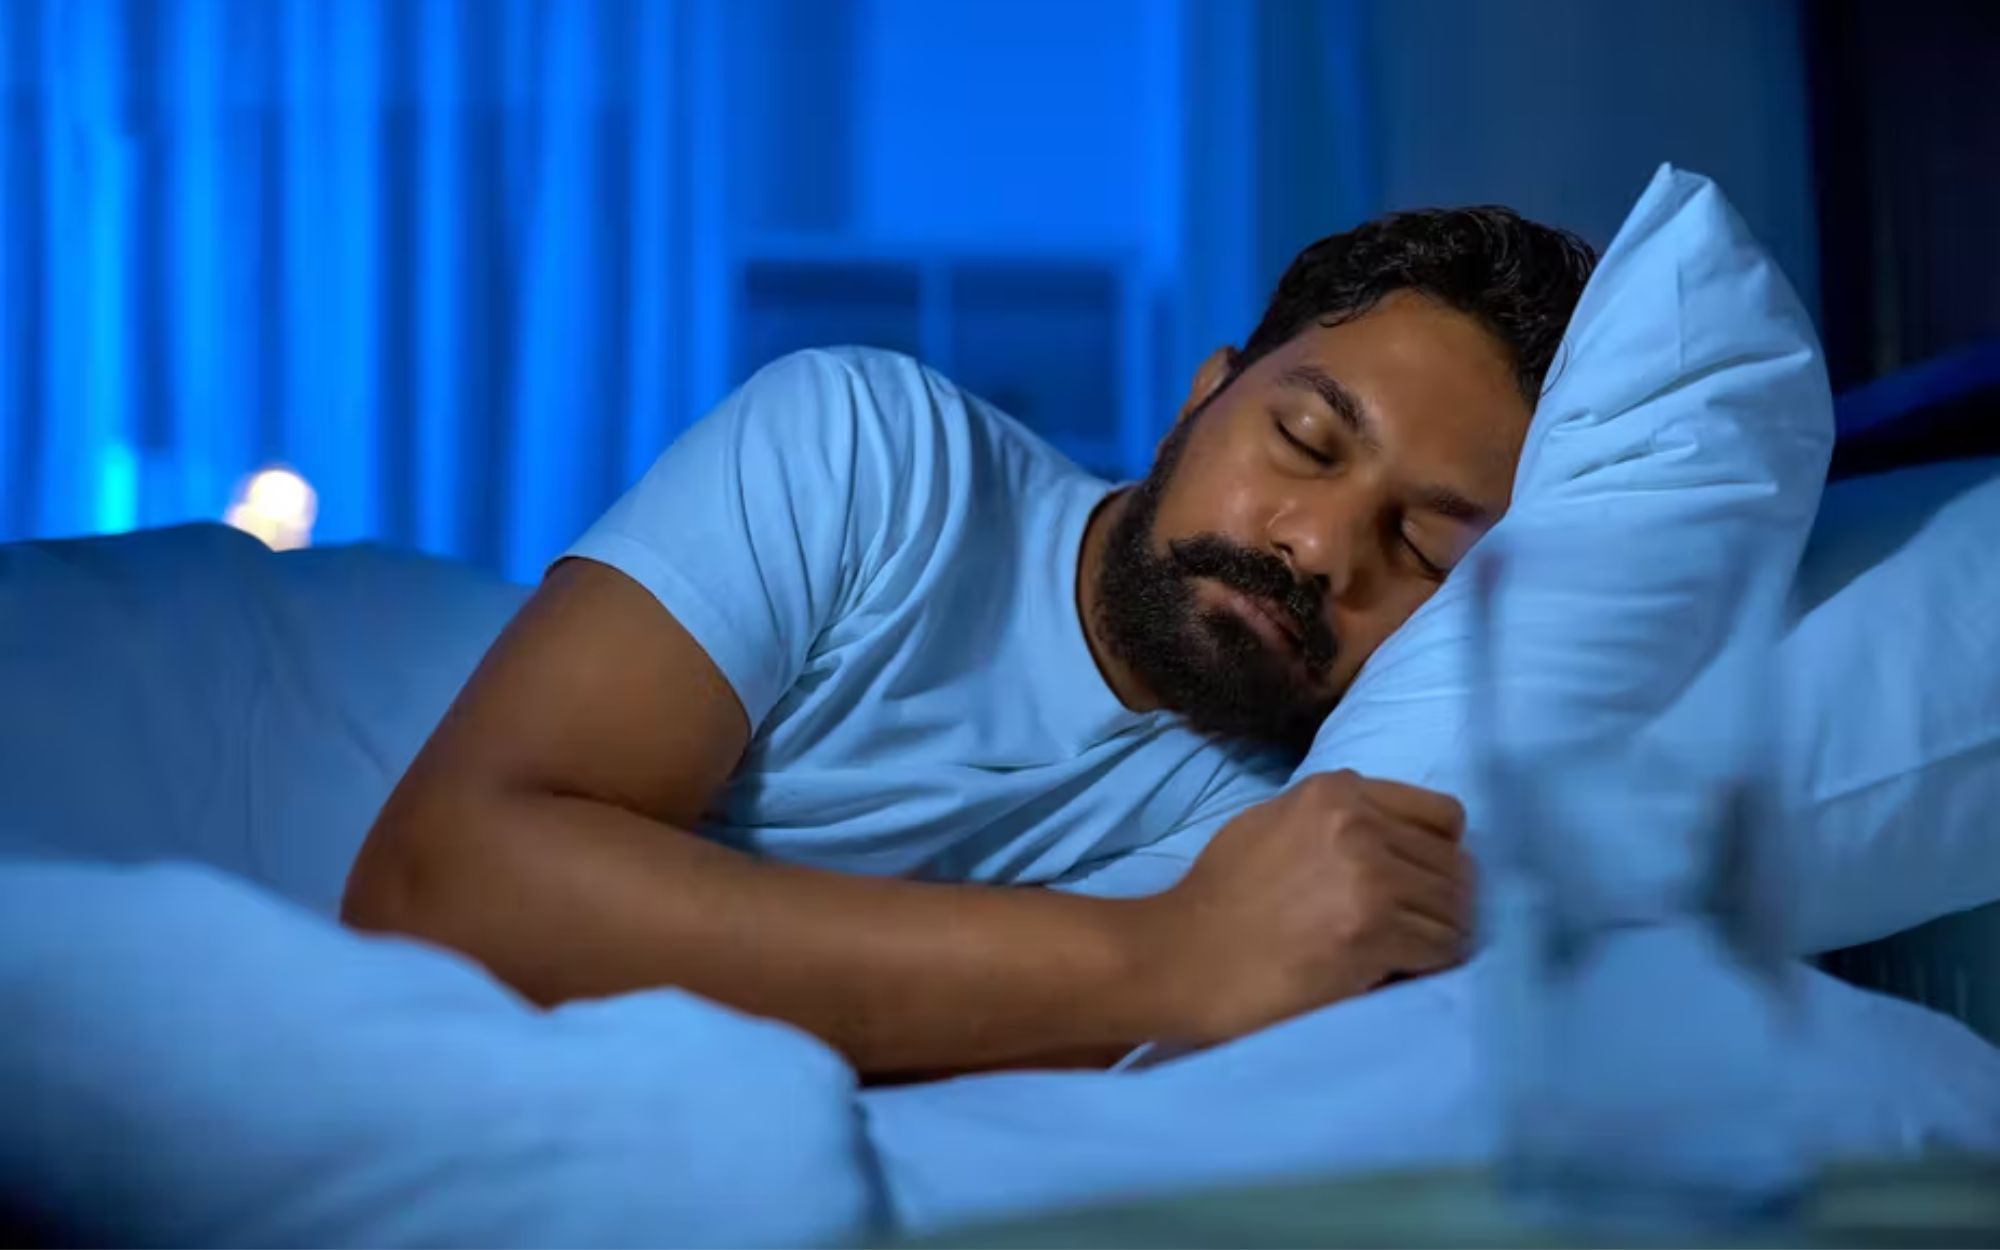 A man is sleeping while wearing a white t-shirt